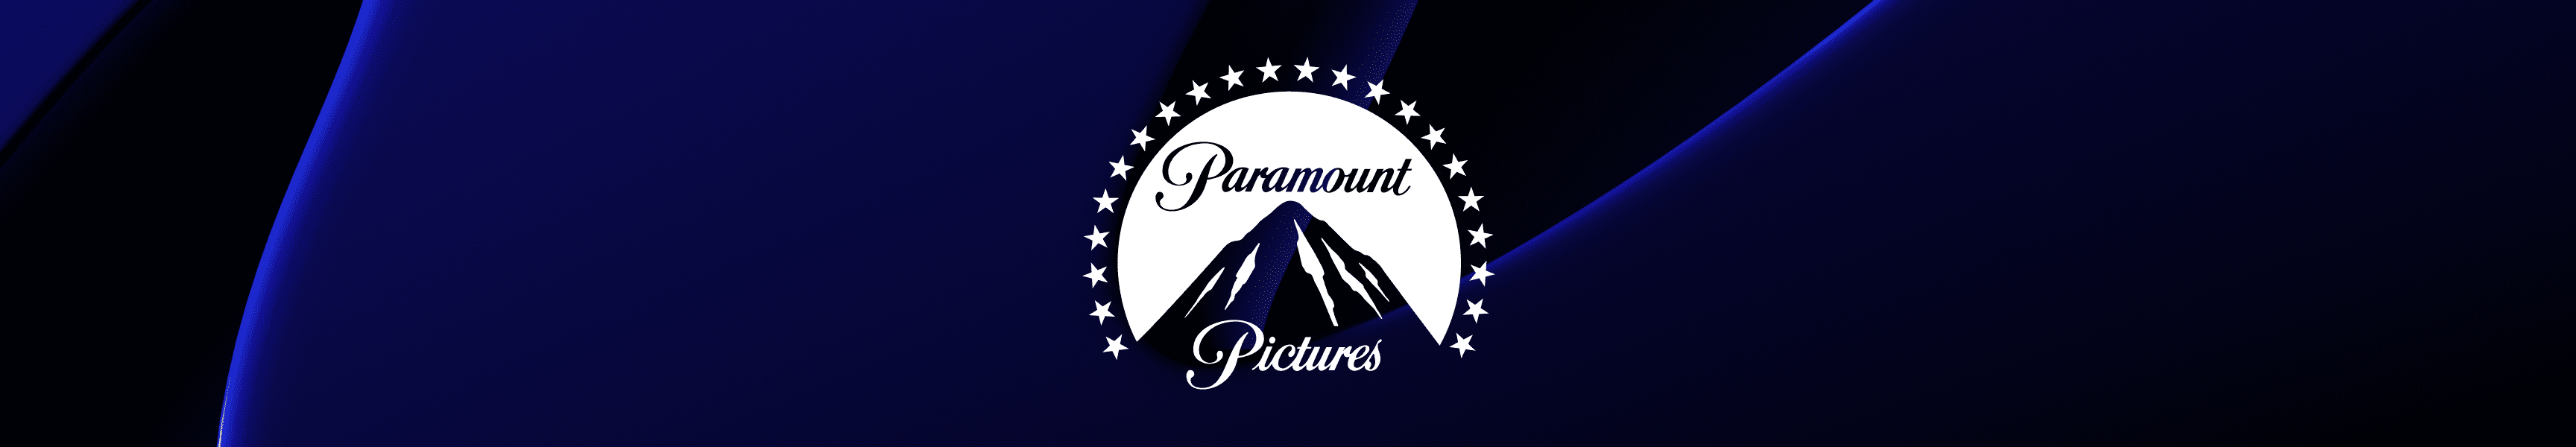 Paramount Pictures Notebooks